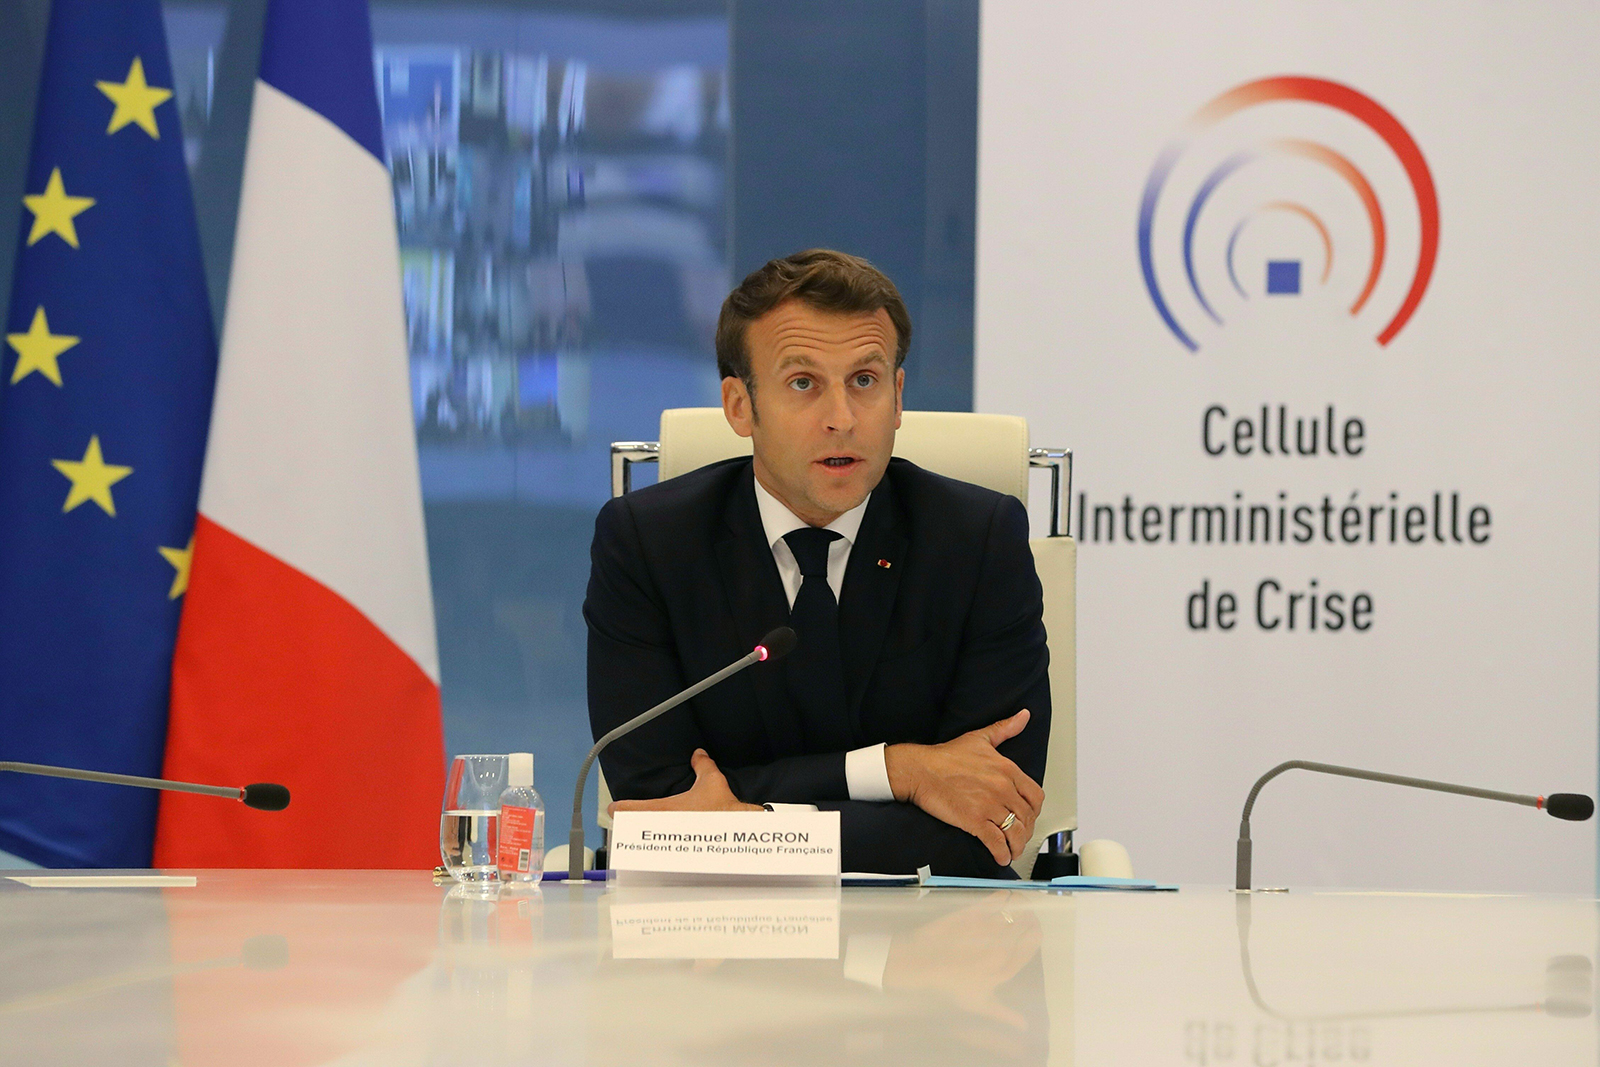 French President Emmanuel Macron takes part in a video conference at the Crisis Center of the Interior Ministry, on May 13, in Paris.